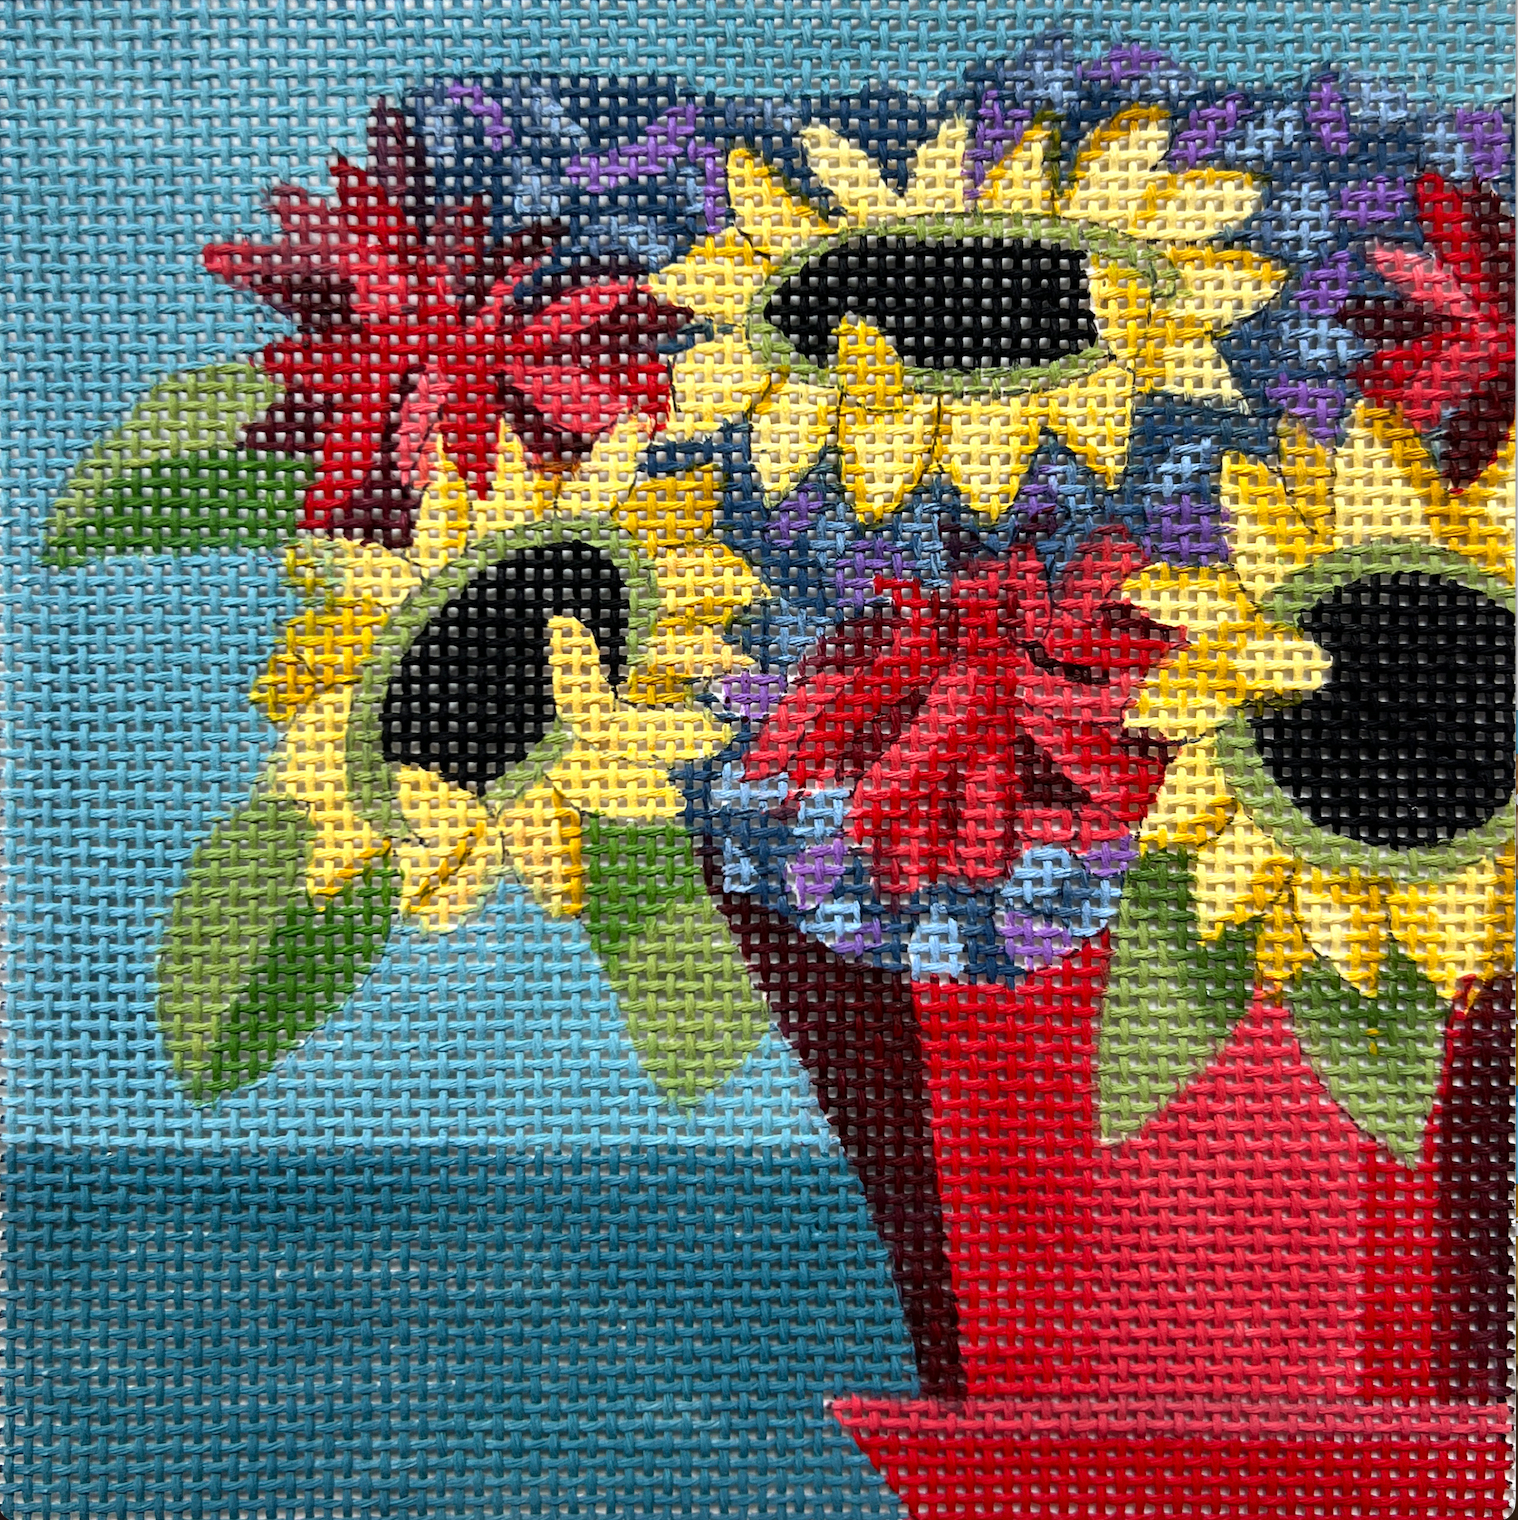 Alice Peterson AP4720 Sunflowers in Red Pot